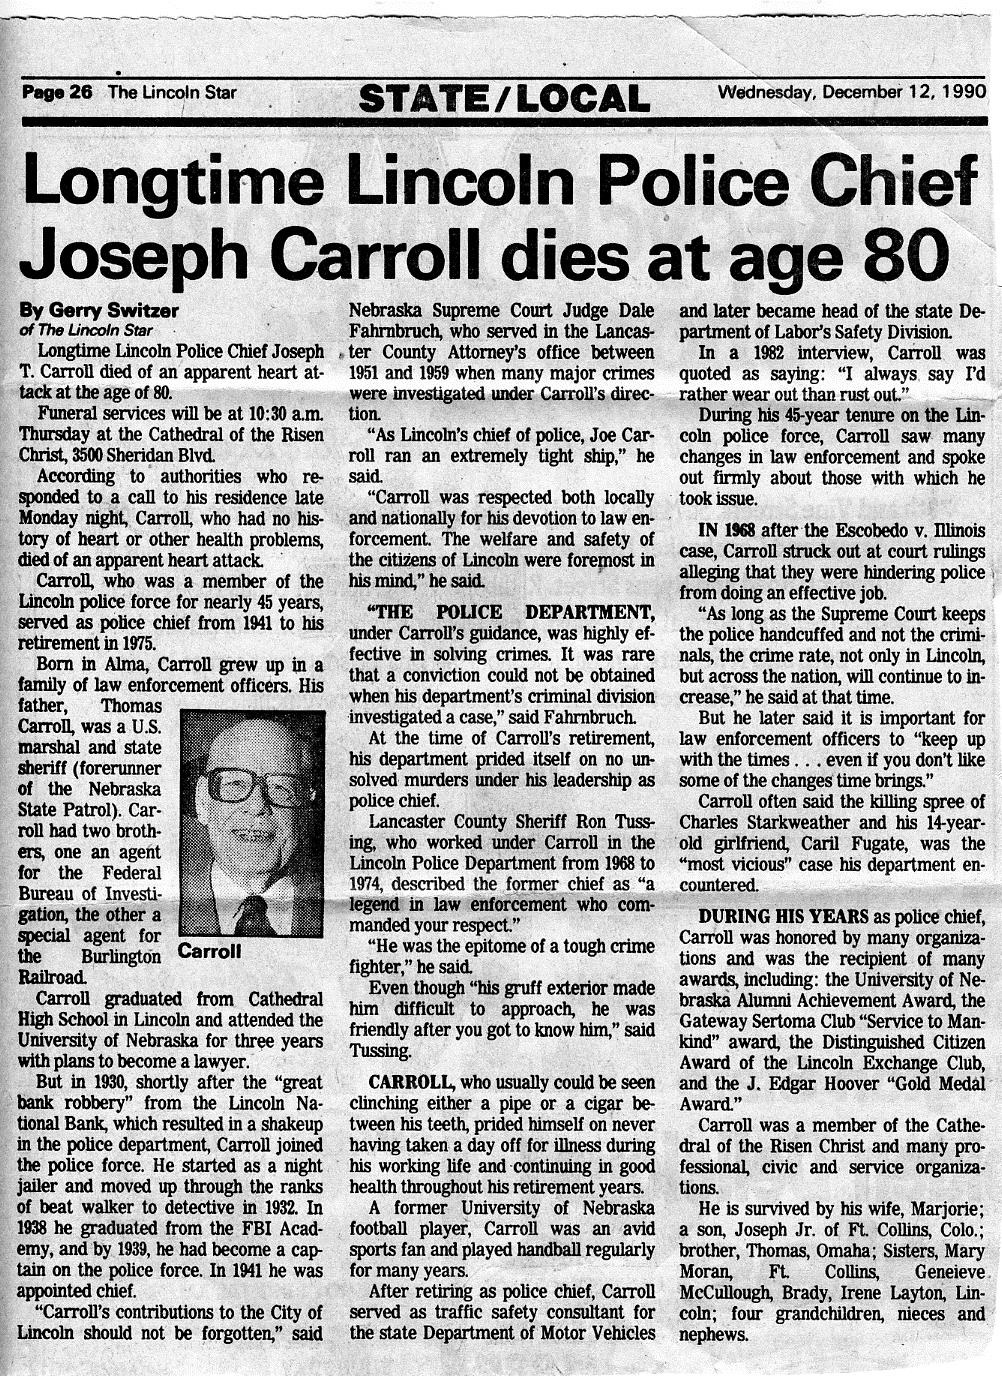 Newspaper clipping with headline 'Longtime Lincoln Police Chief Joseph Carroll dies at age 80'